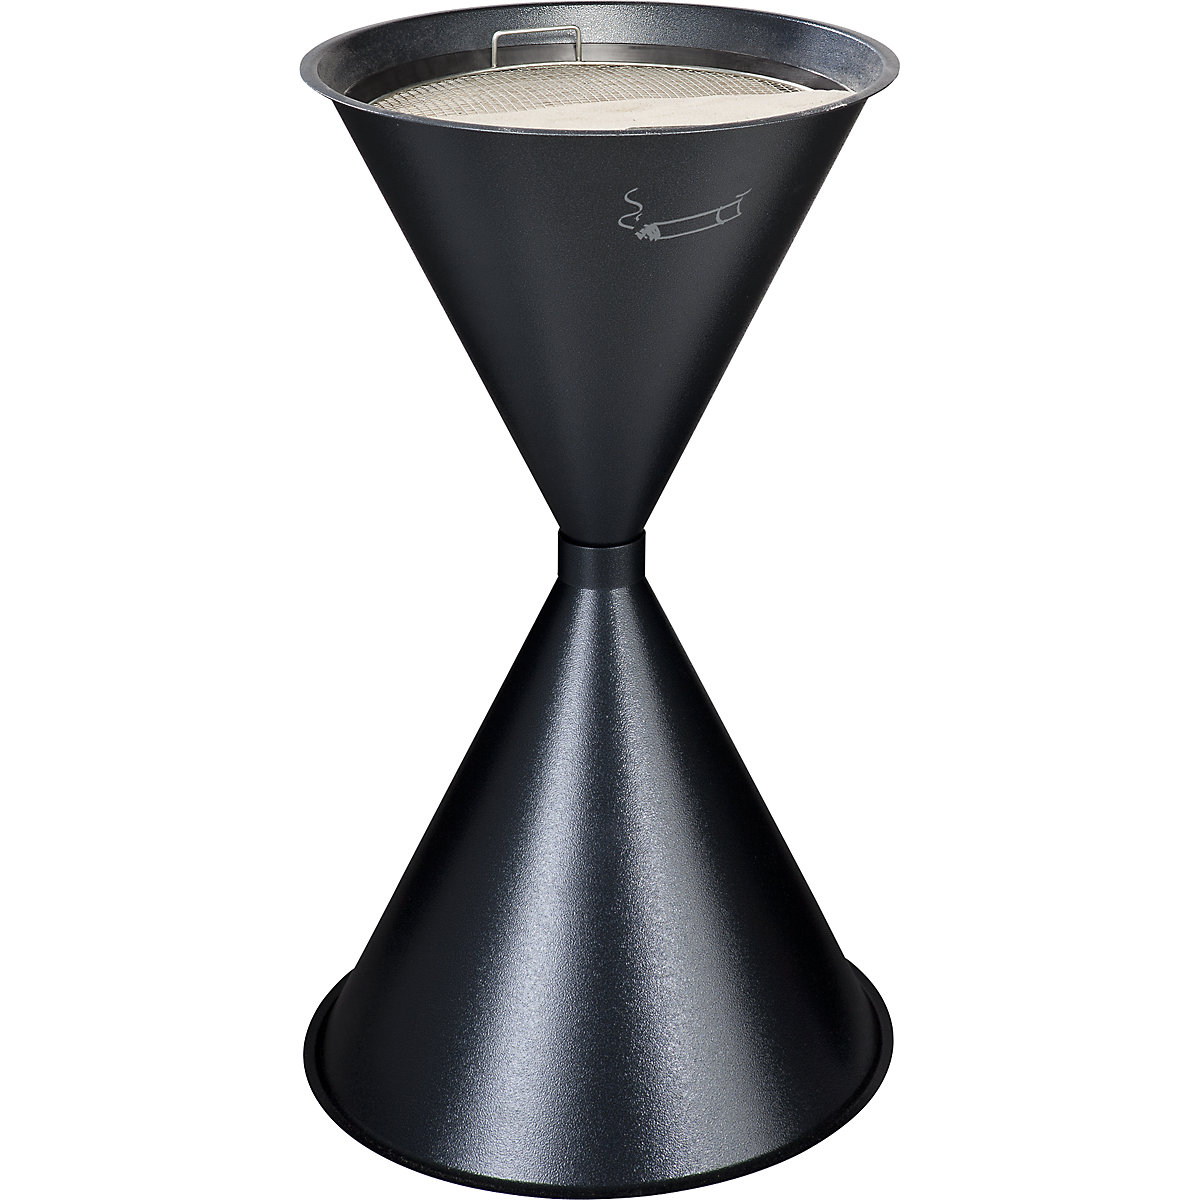 VAR – Conical ashtray made of metal